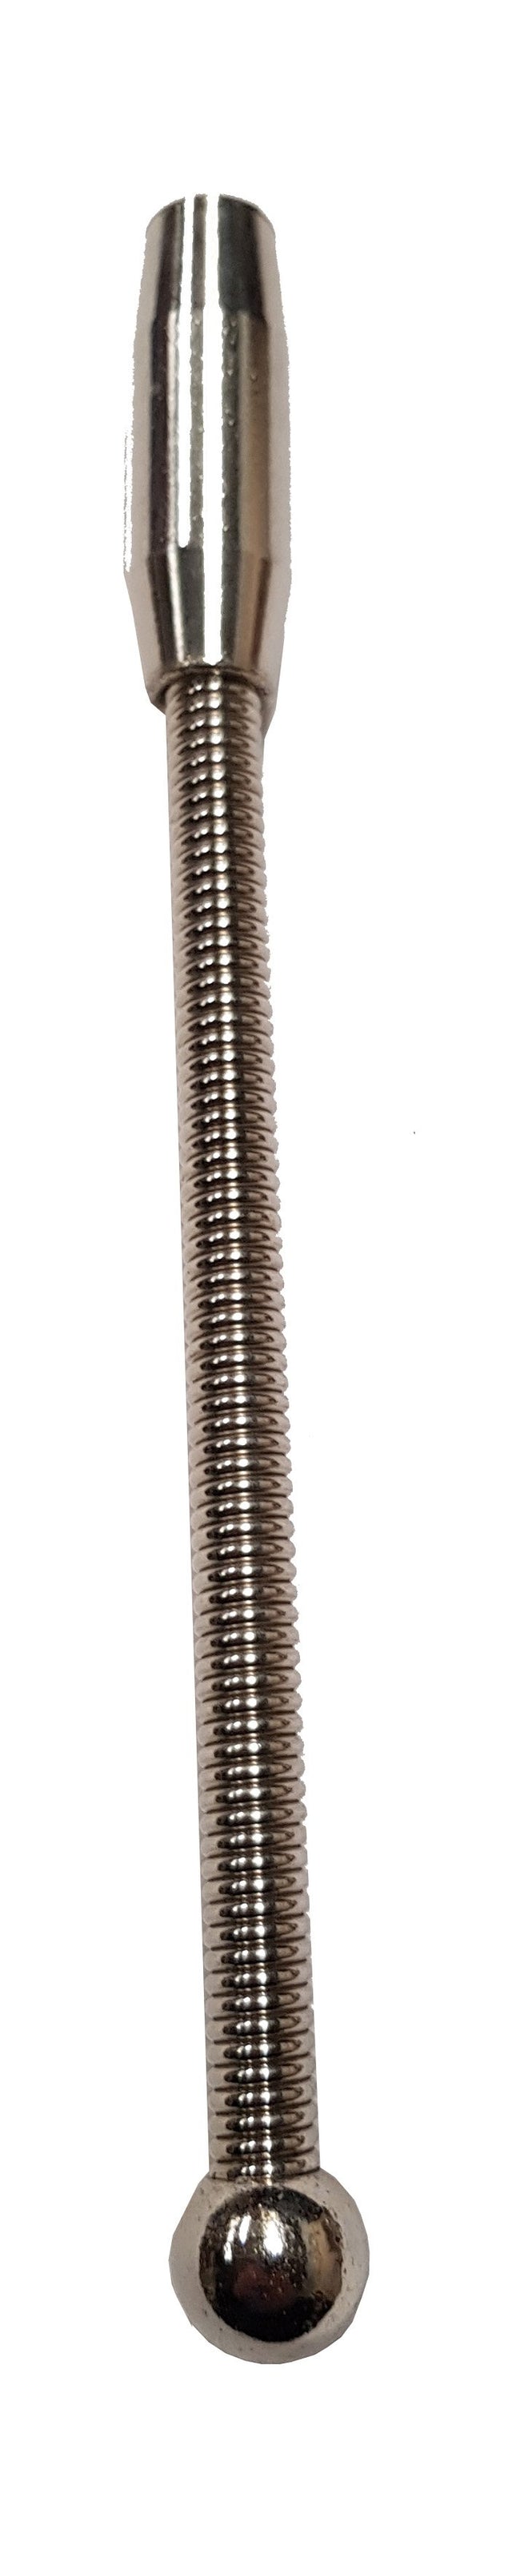 Duct Rod  - Flexible Guide Heads